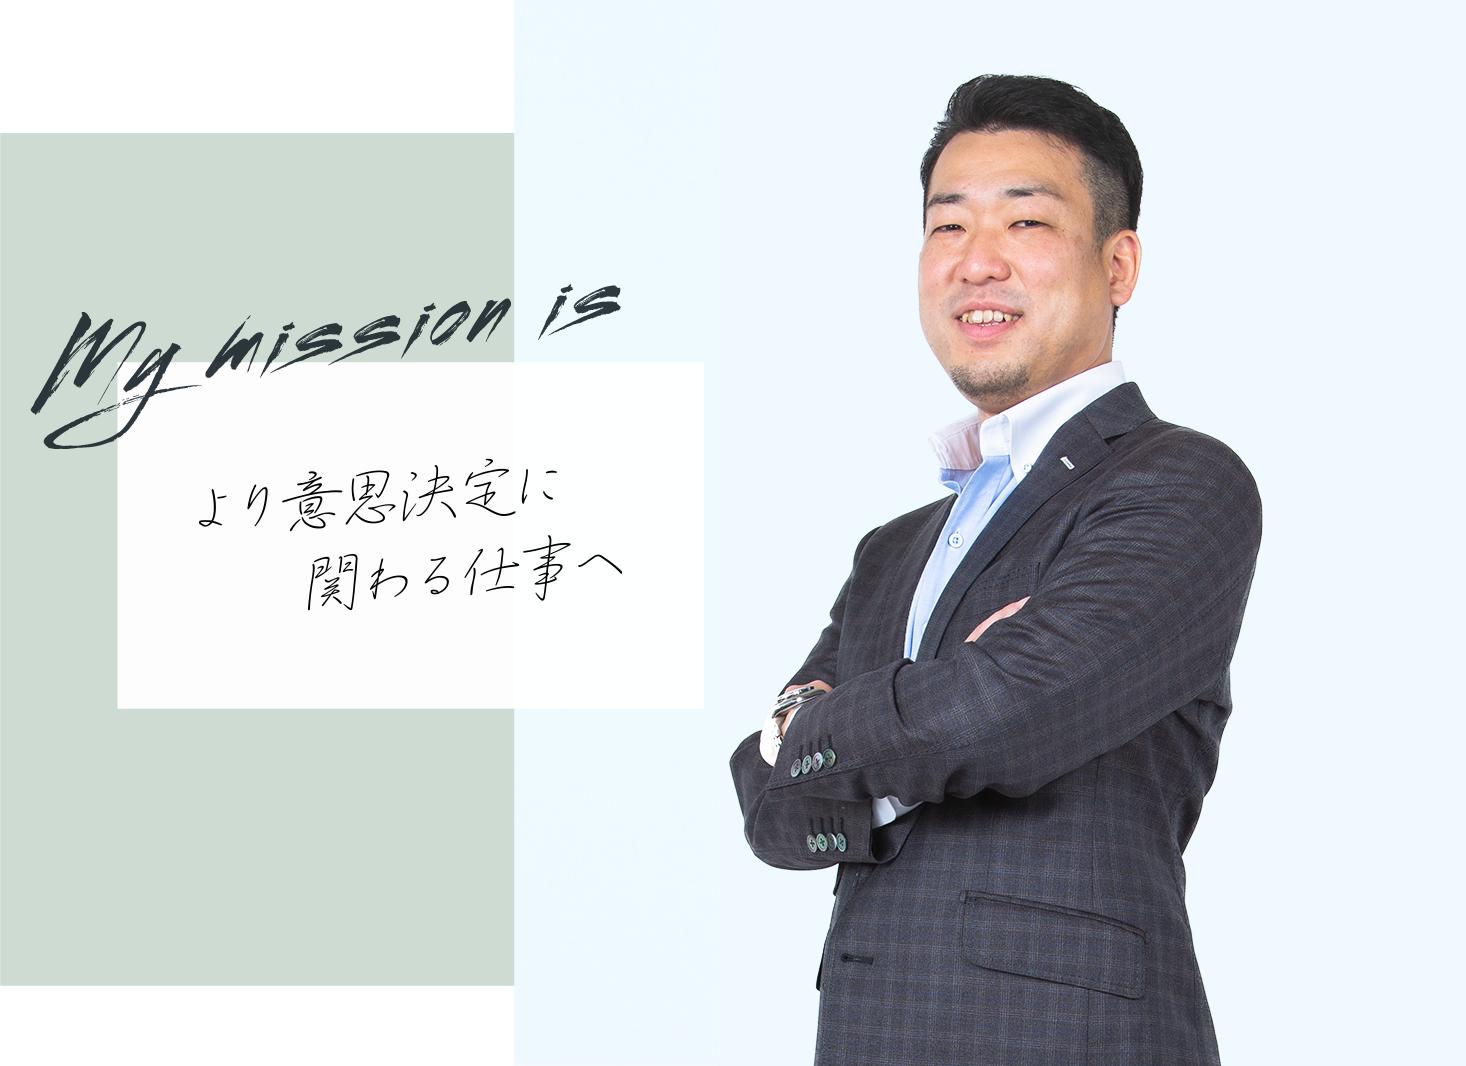 my mission is より意思決定に関わる仕事へ、堀尾 直也